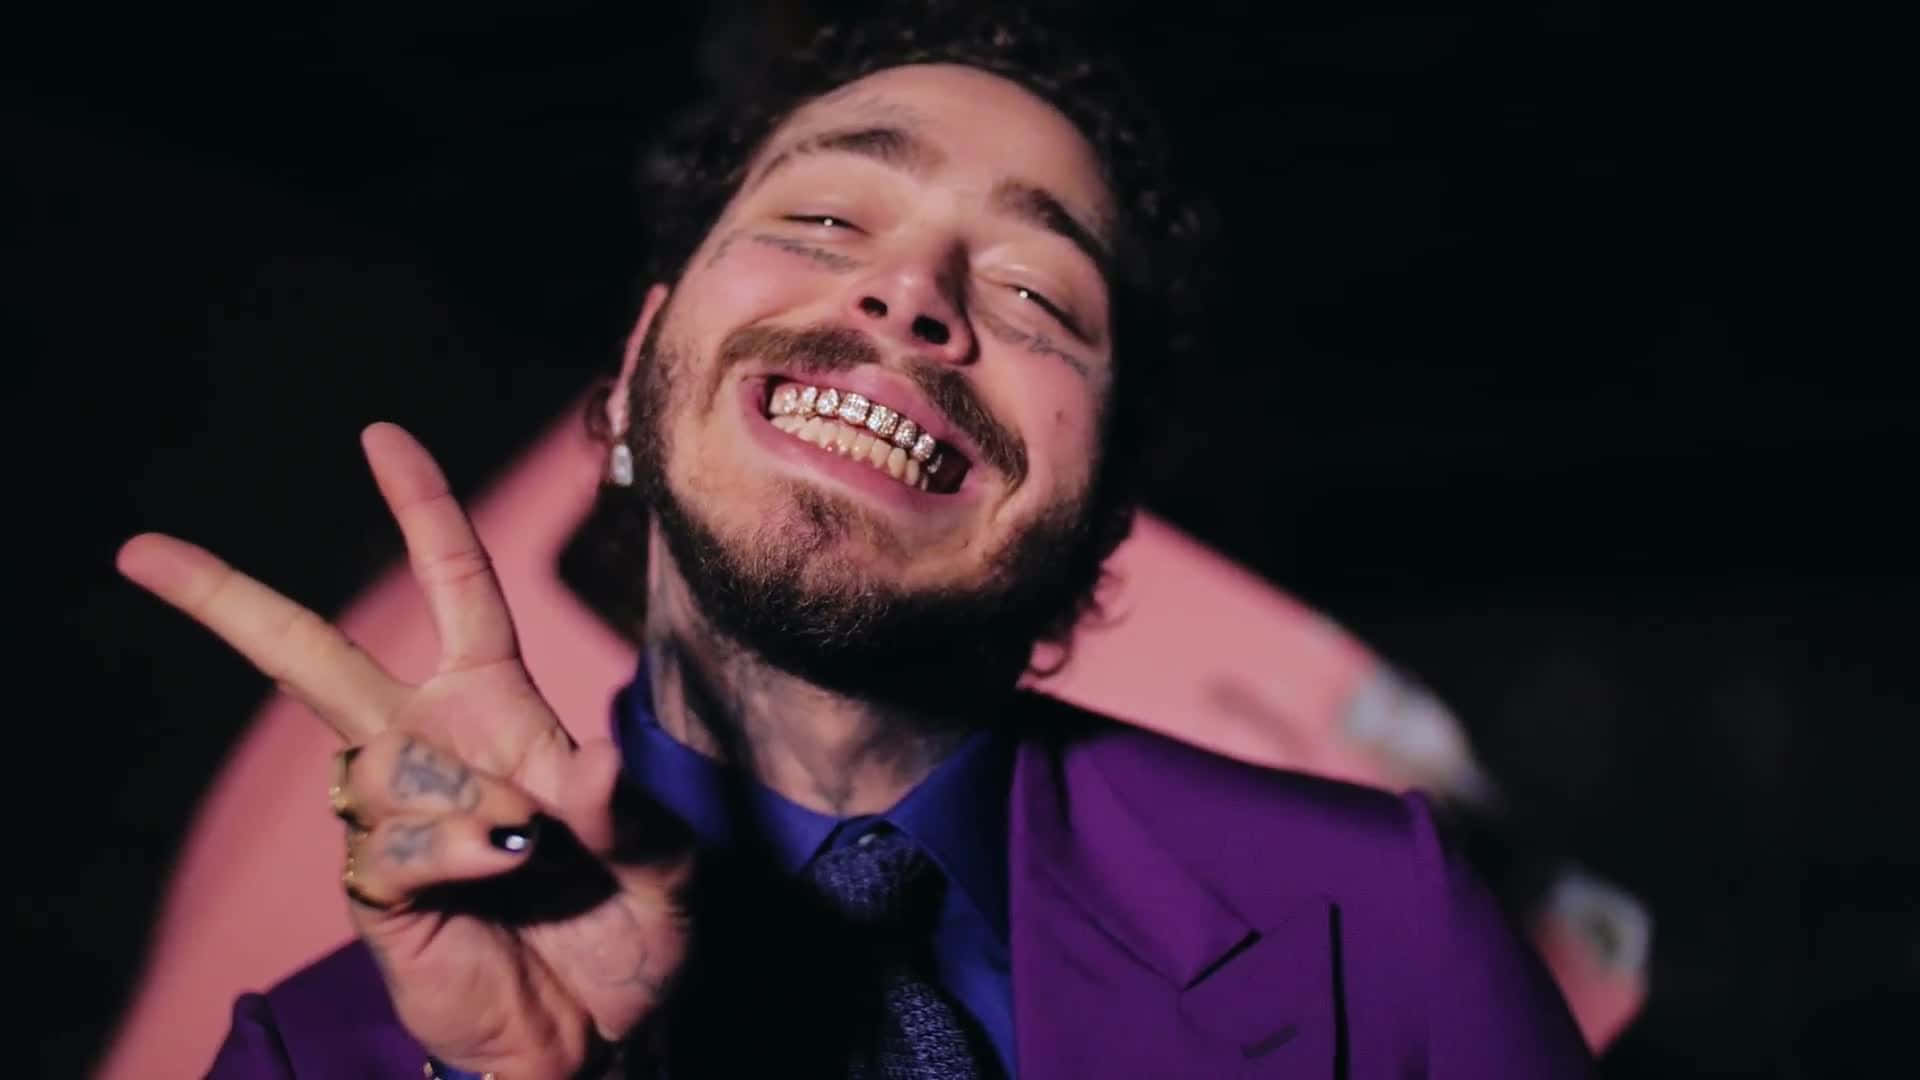 Post Malone exudes musical success in his iconic outfit